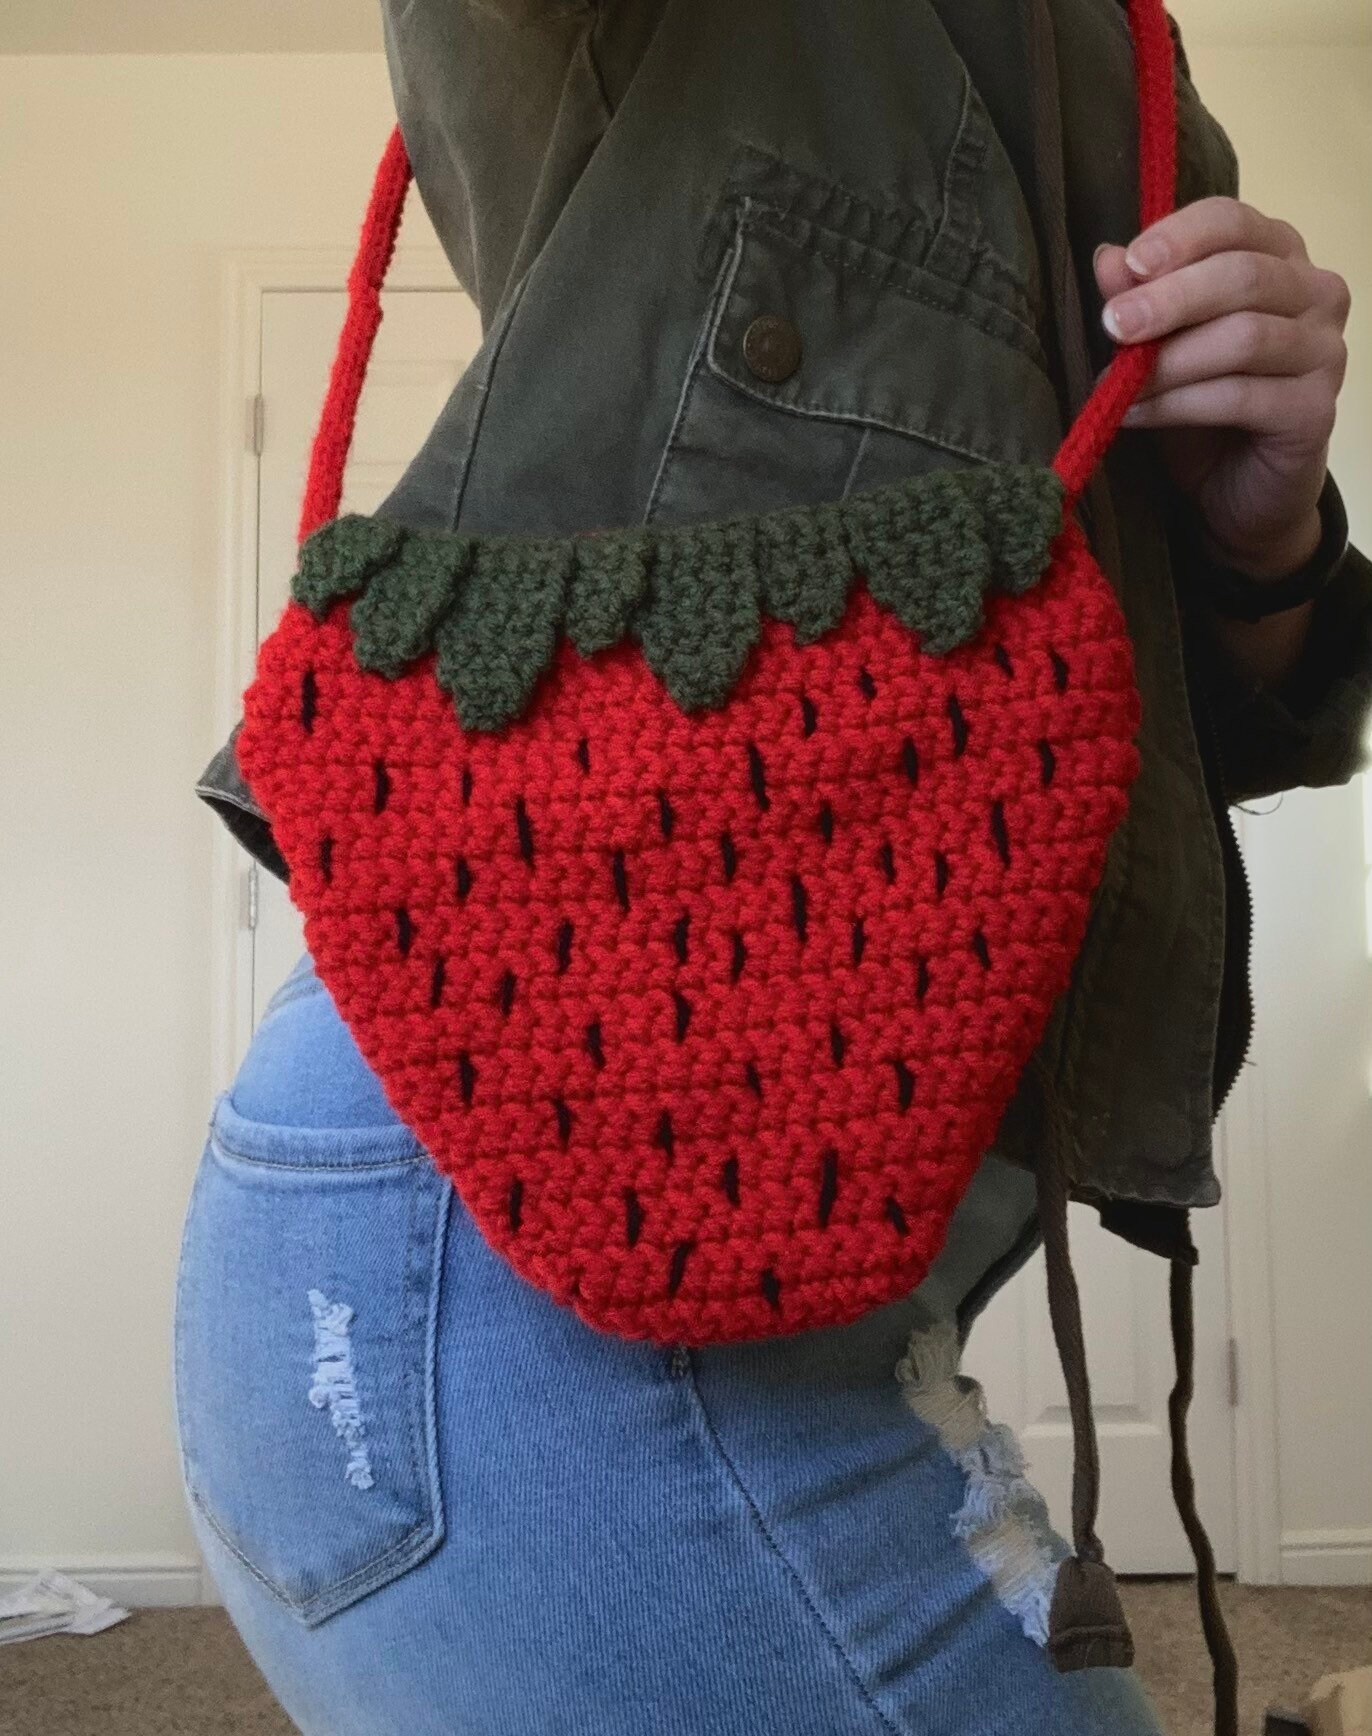 Strawberry Purse zippered and Lined Crochet Purse | Etsy